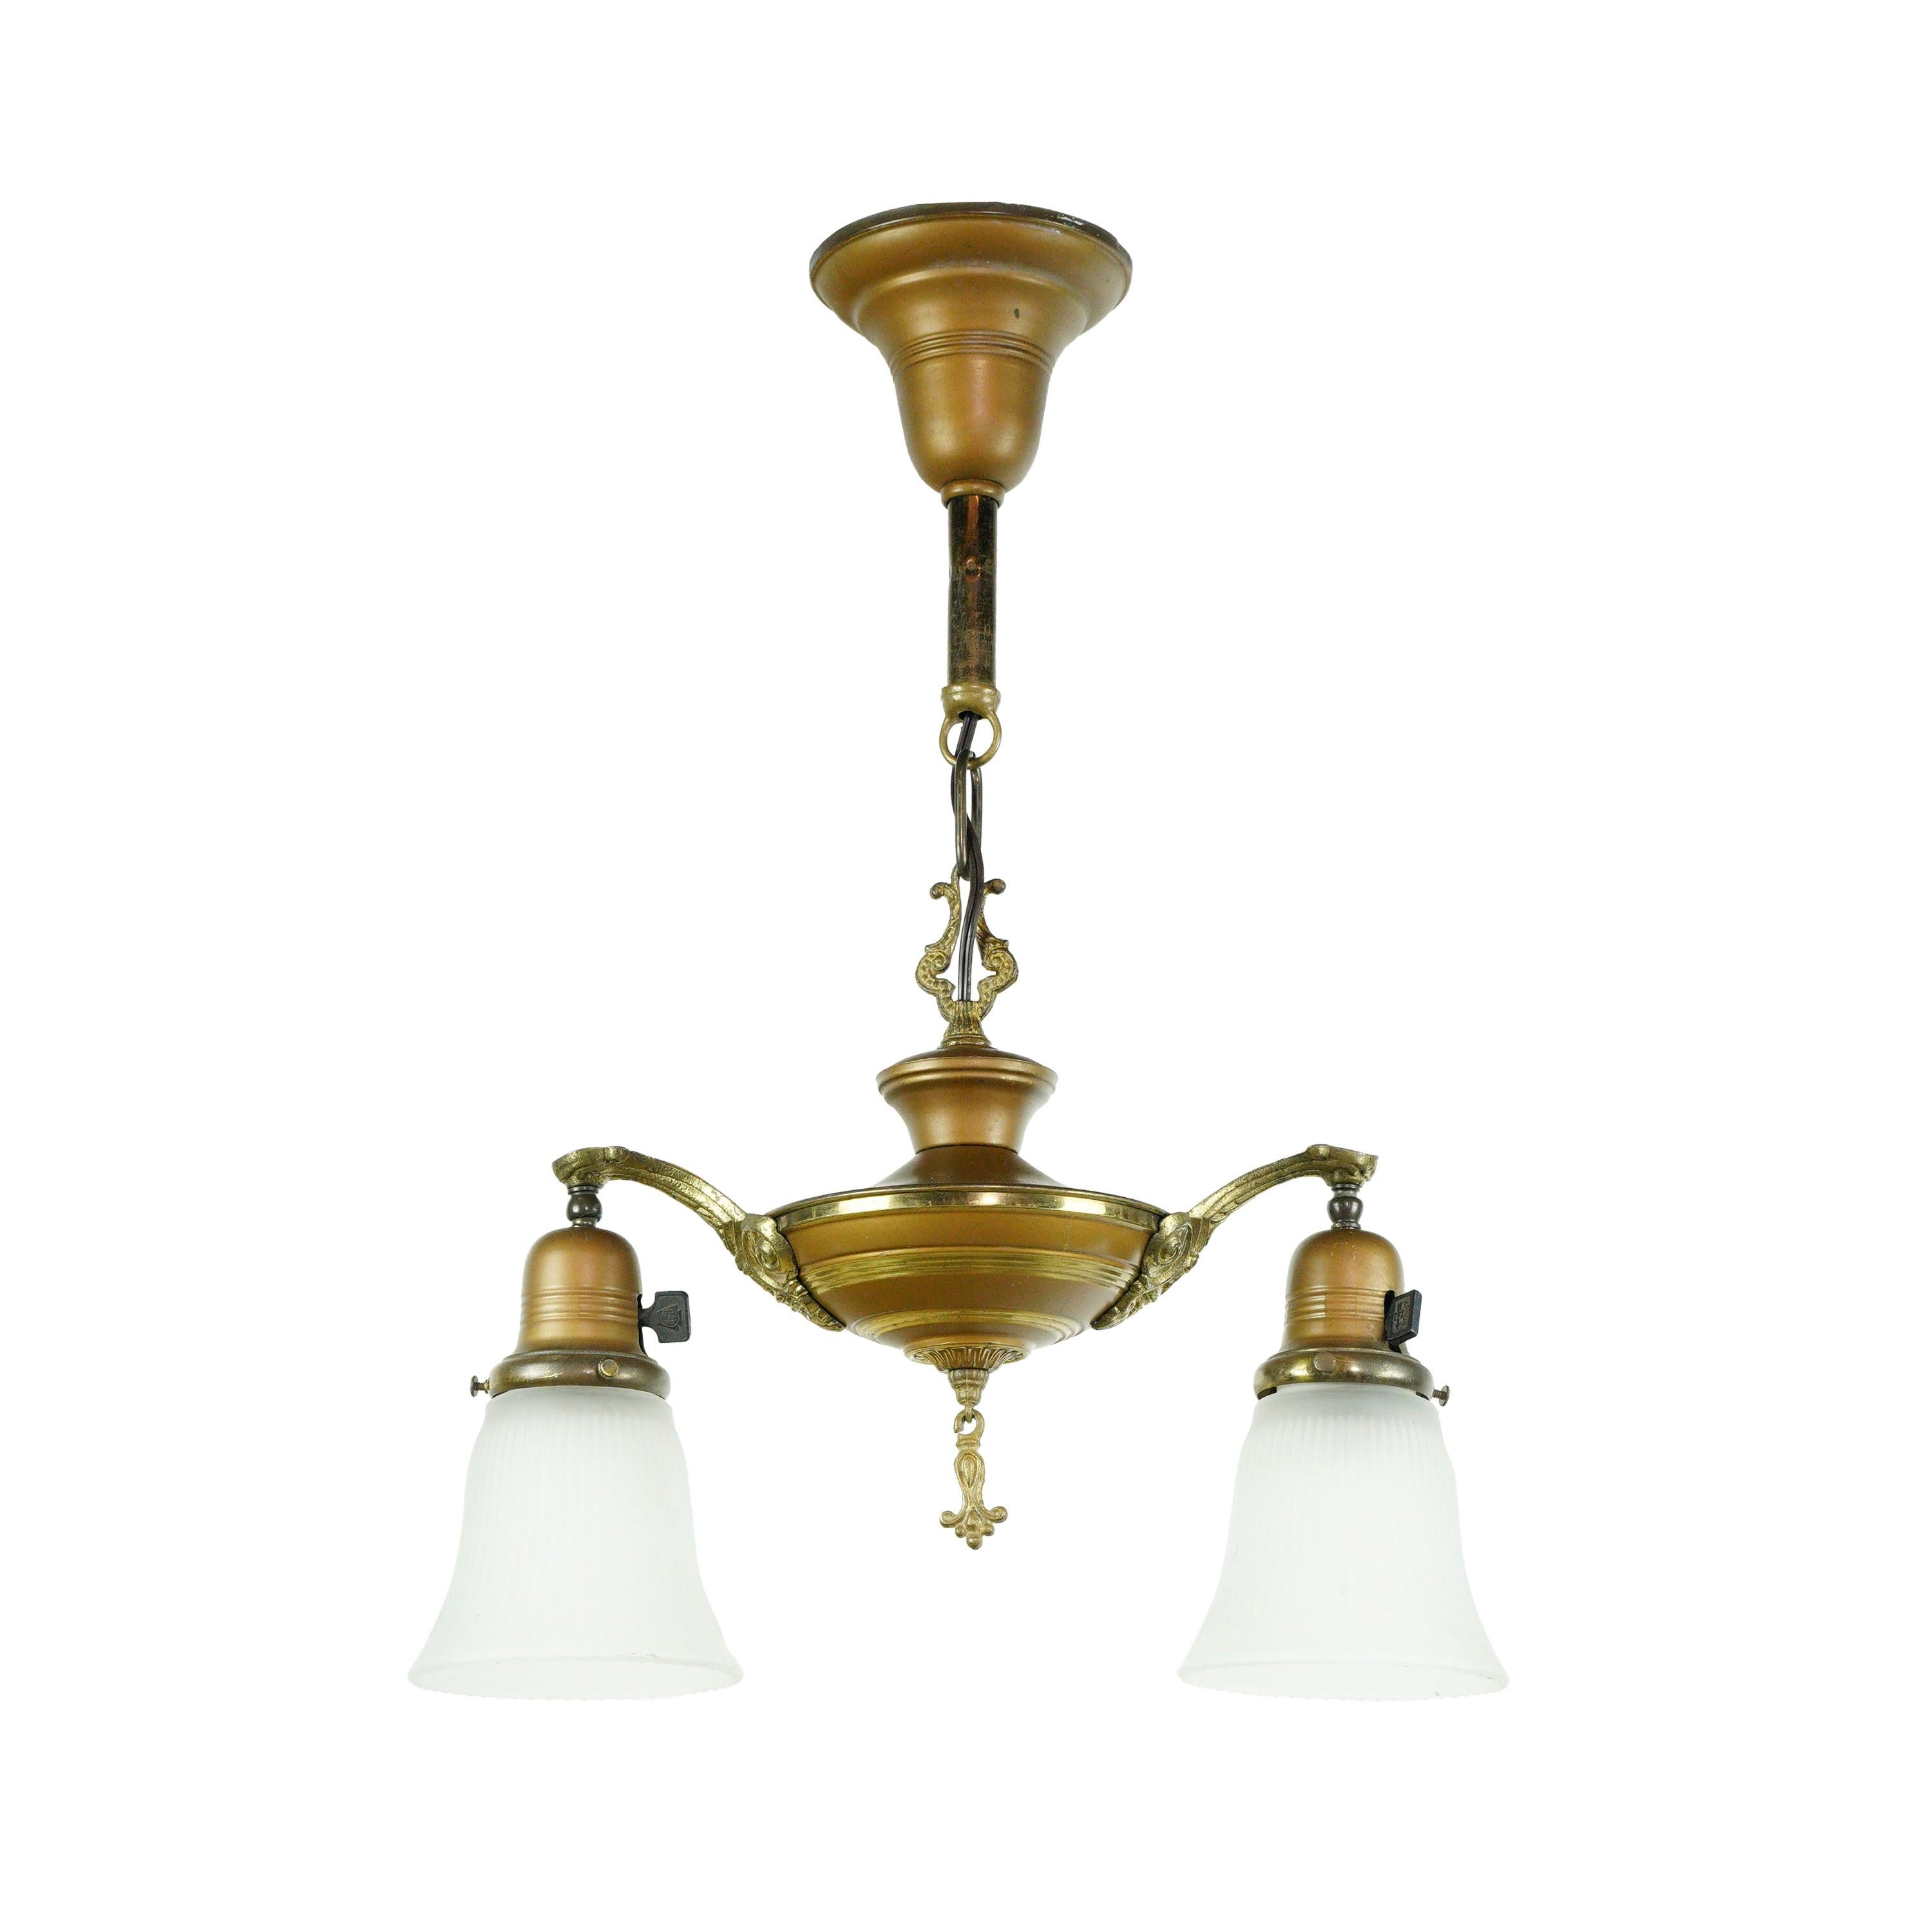 Victorian style brass down light pendant light with two opaque glass shades. This takes two standard medium base light bulbs. Cleaned and restored. This is in good condition, with age appropriate surface scratches. Please note, this item is located